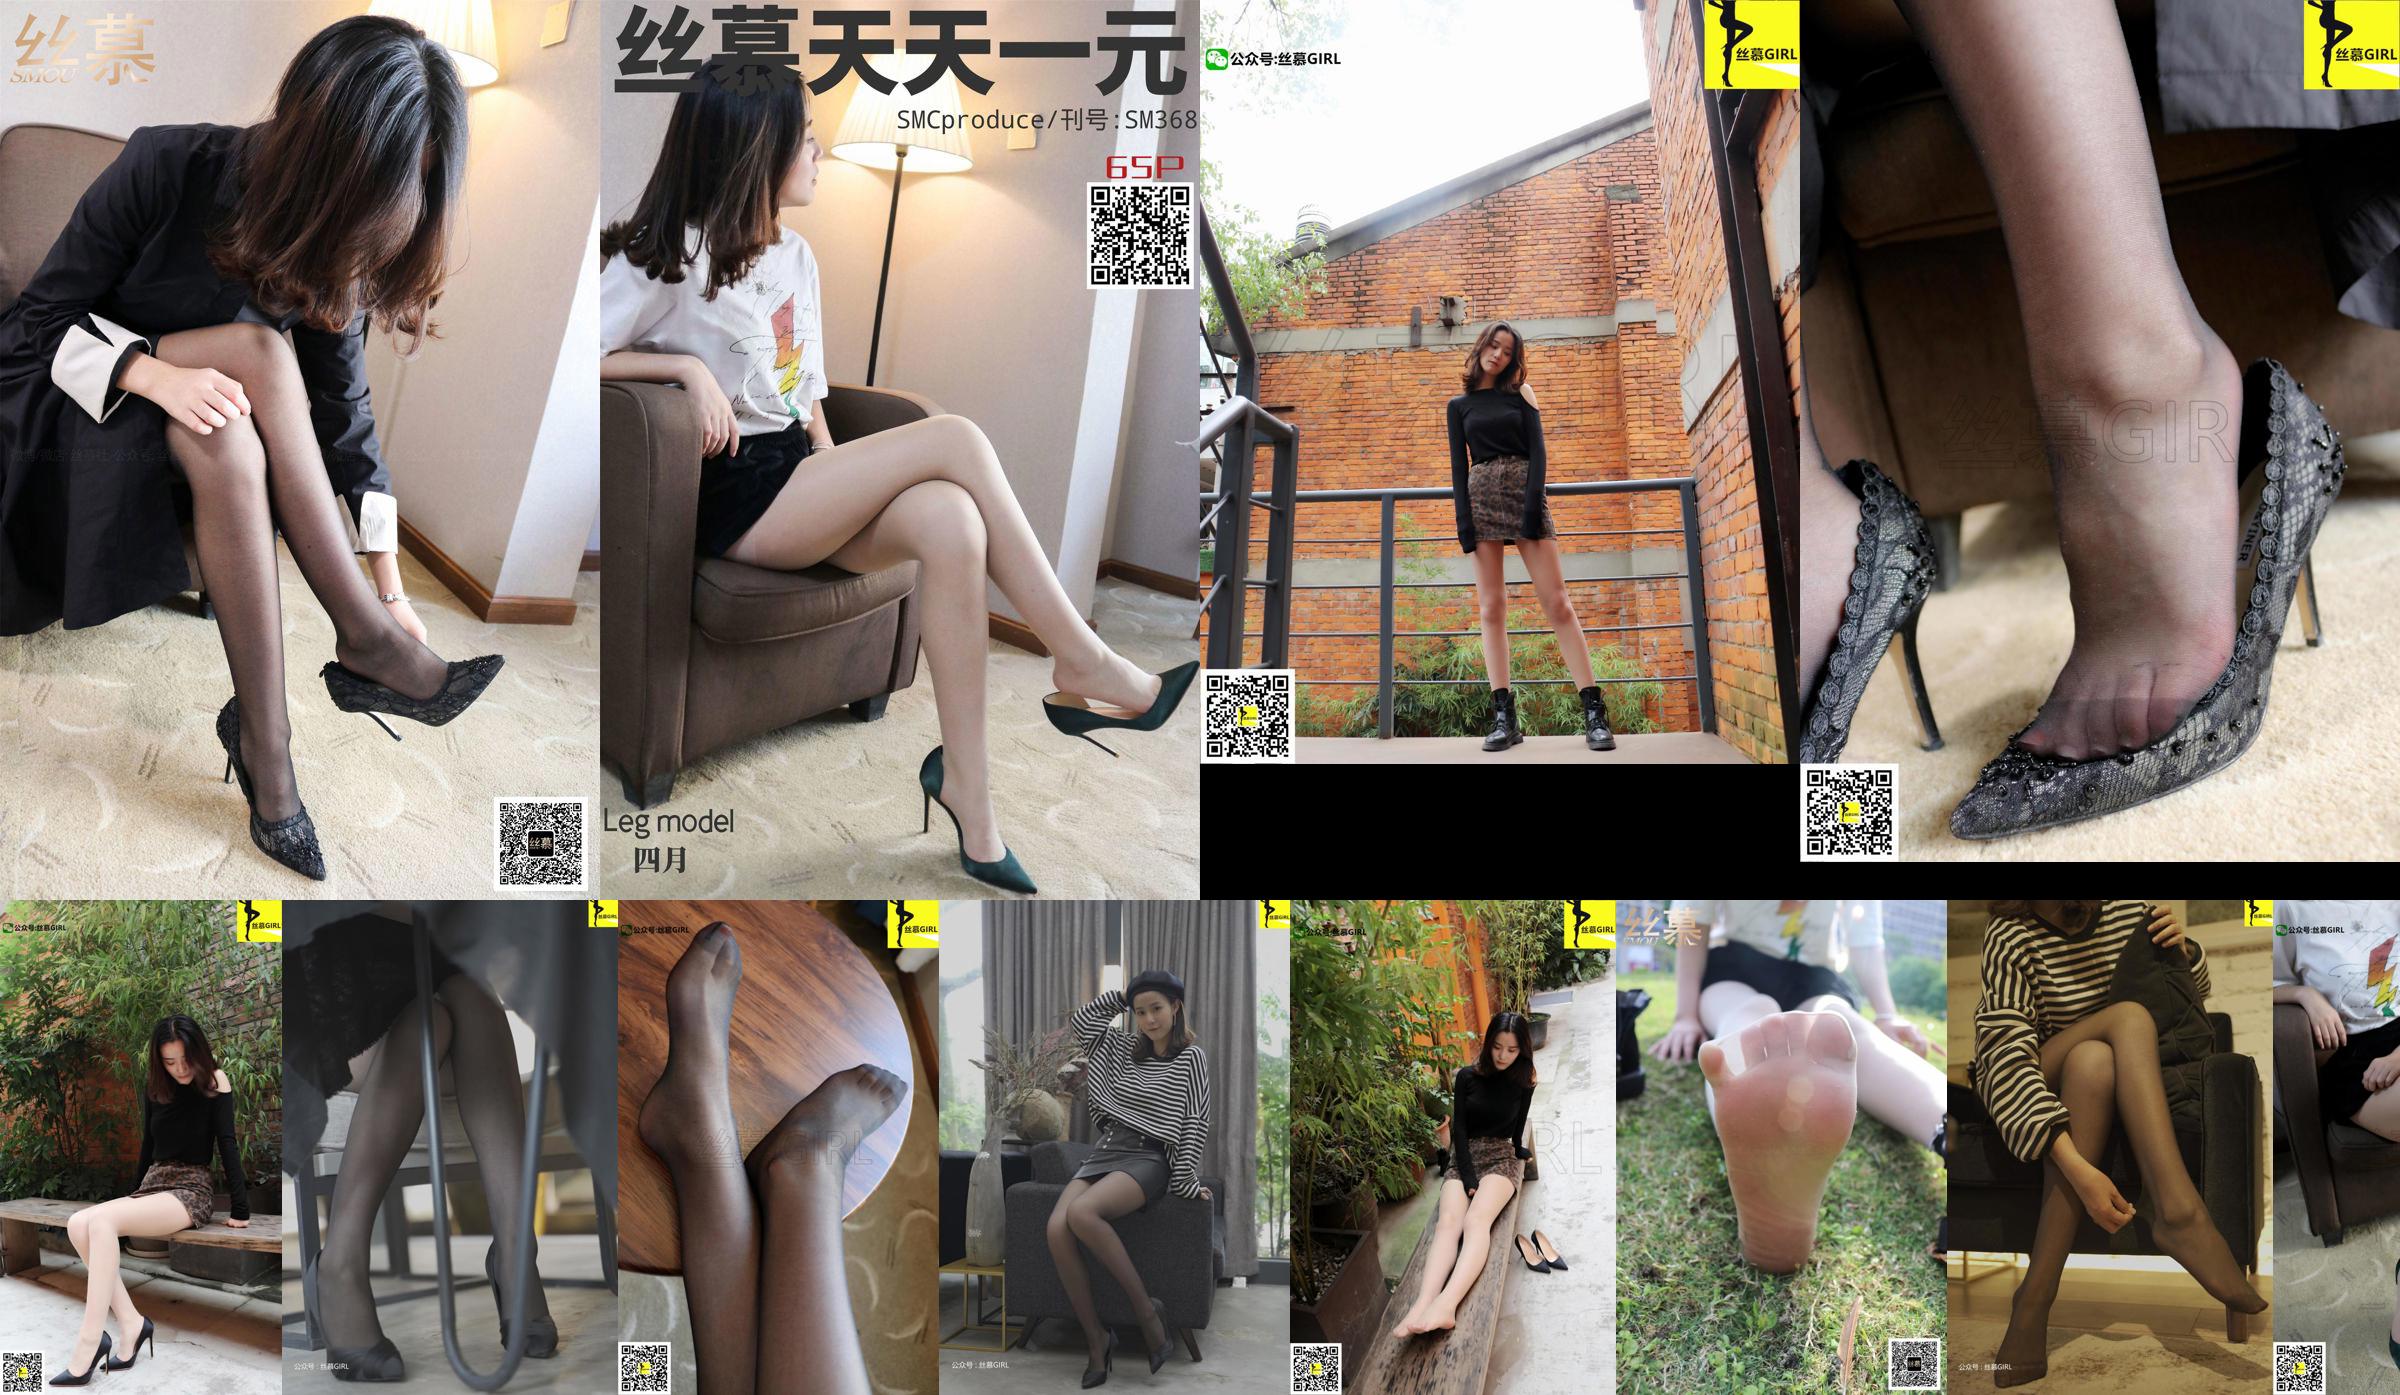 [Simu] Issue 025 April "Whose Legs" No.9a7bbc Page 23